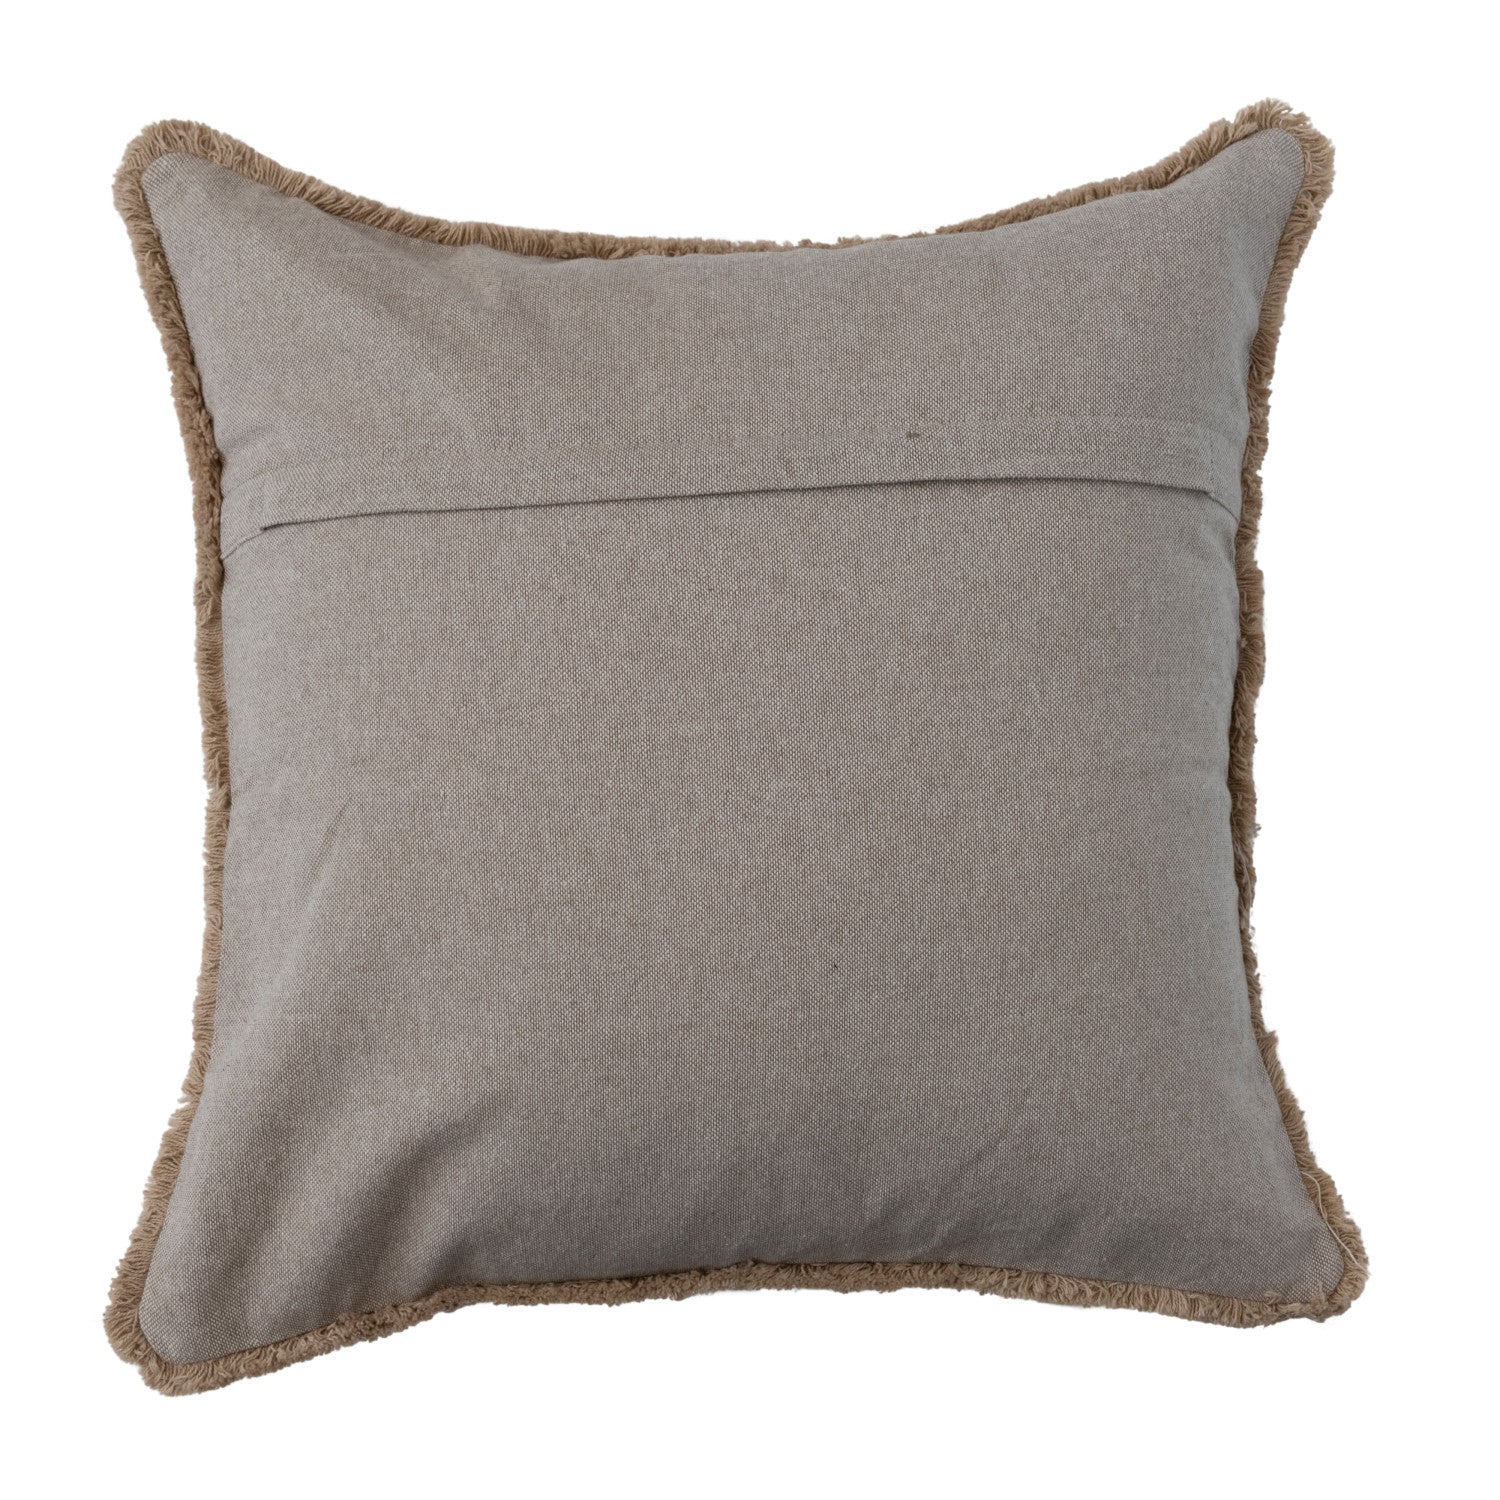 Embroidered Cotton Chambray Pillow